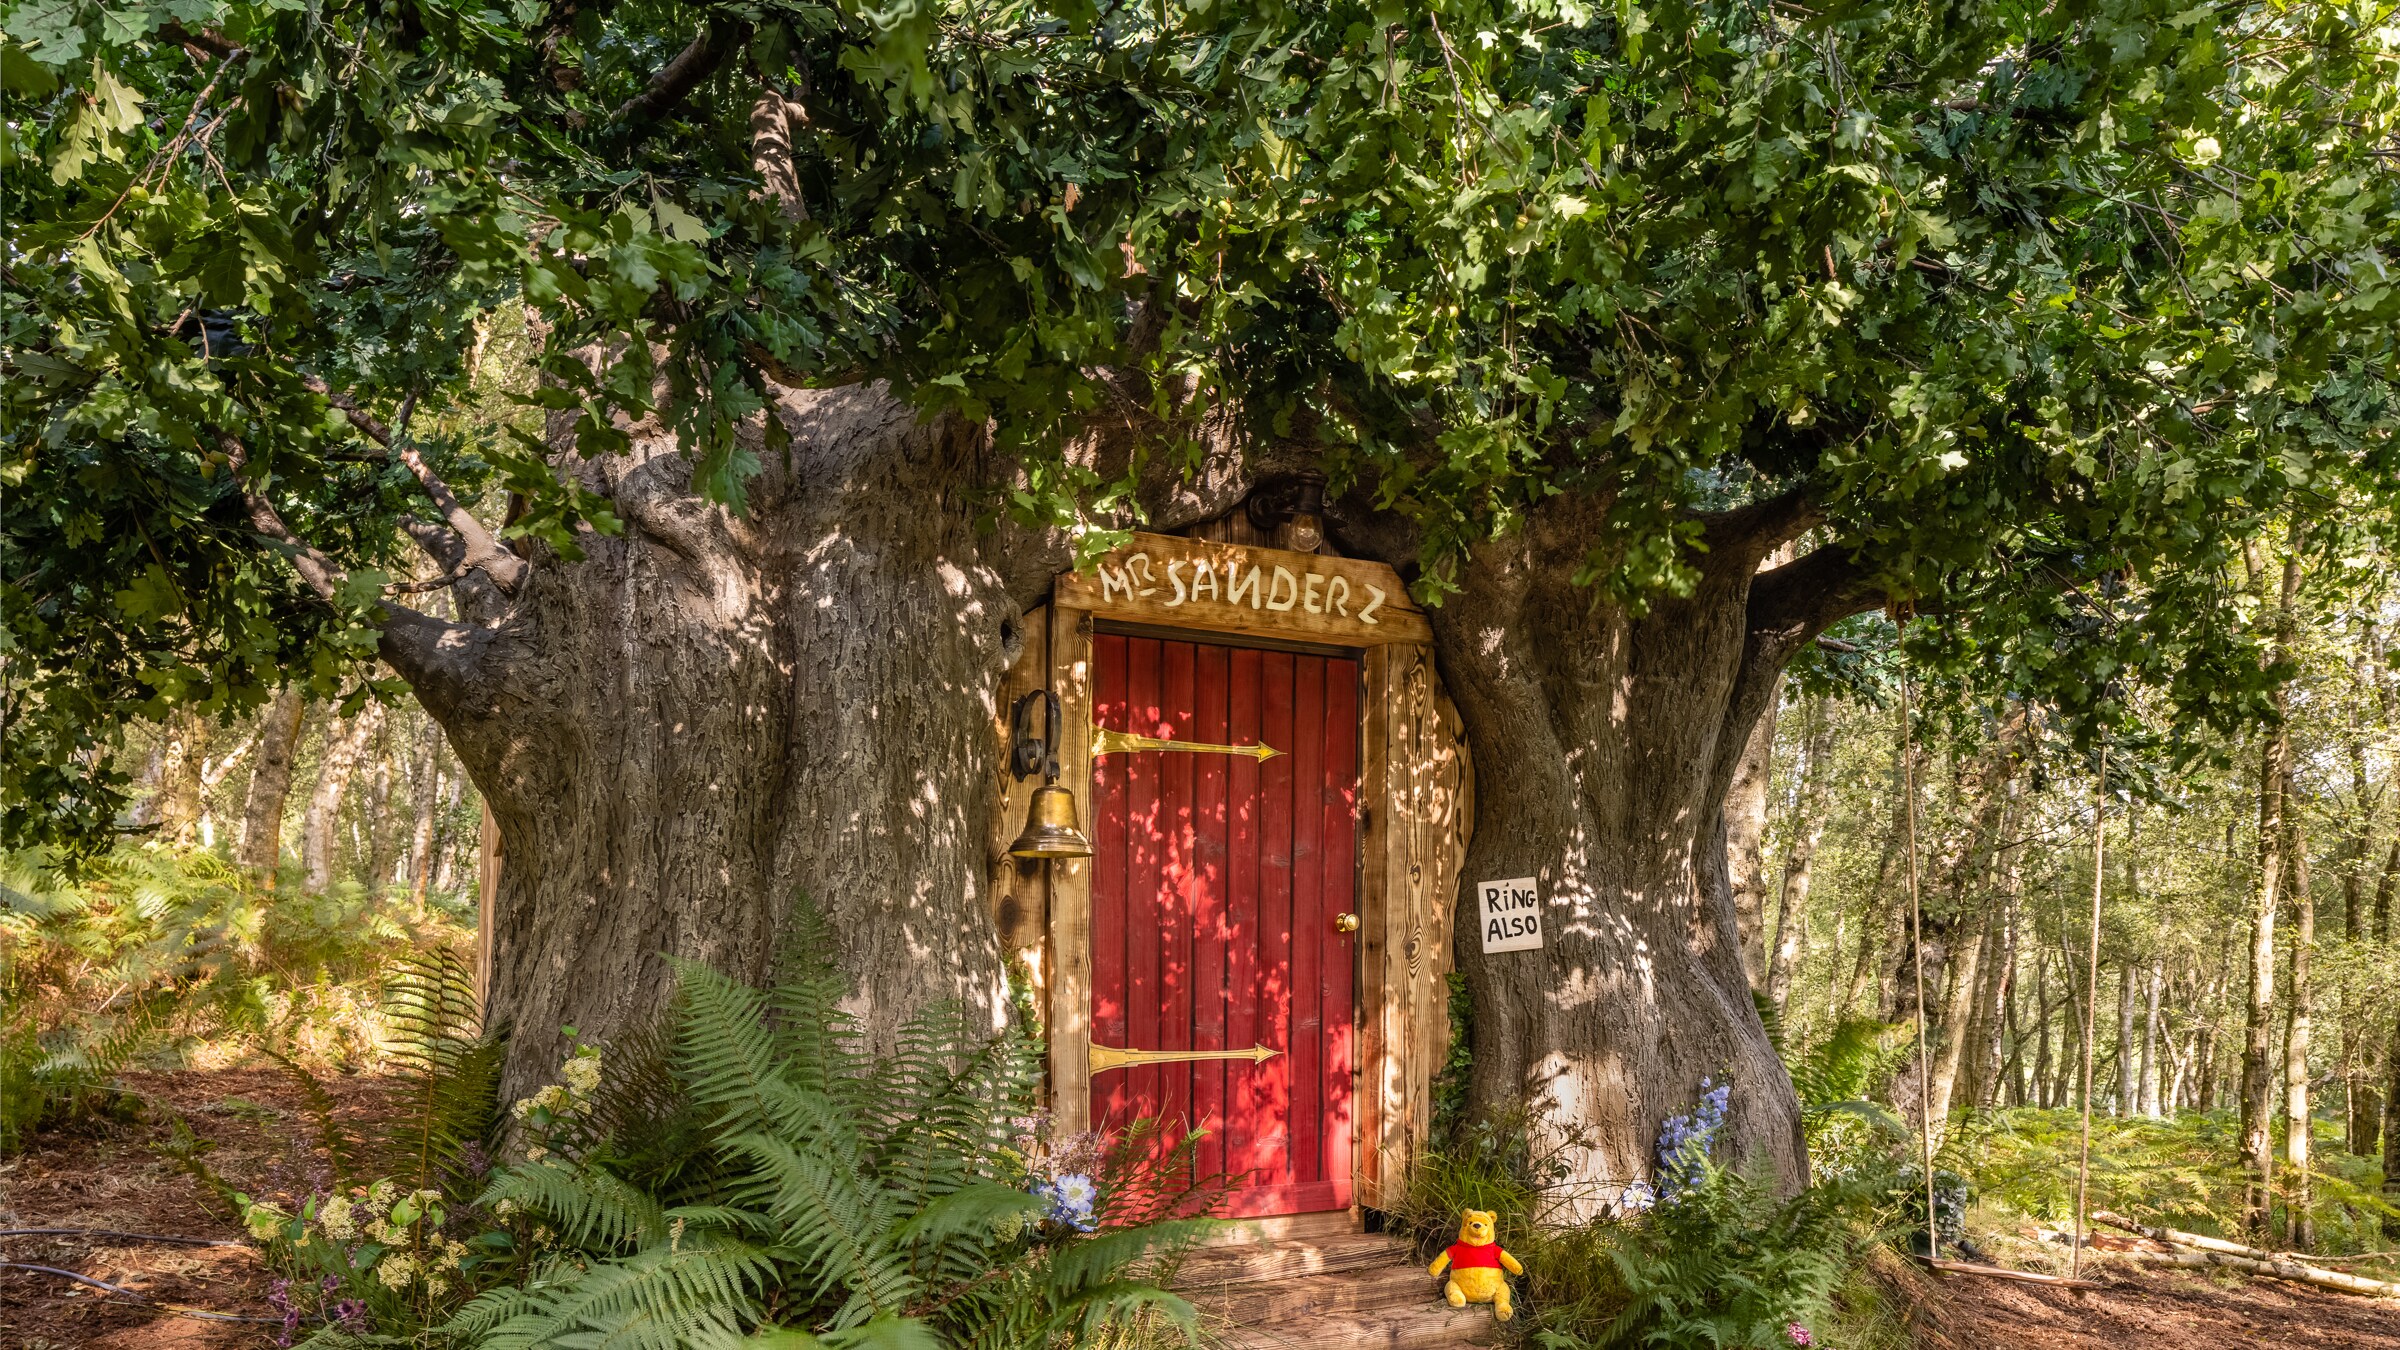 BEARBNB: A House Fit For Disney's Winnie the Pooh in the Original Hundred Acre Wood Lists on Airbnb